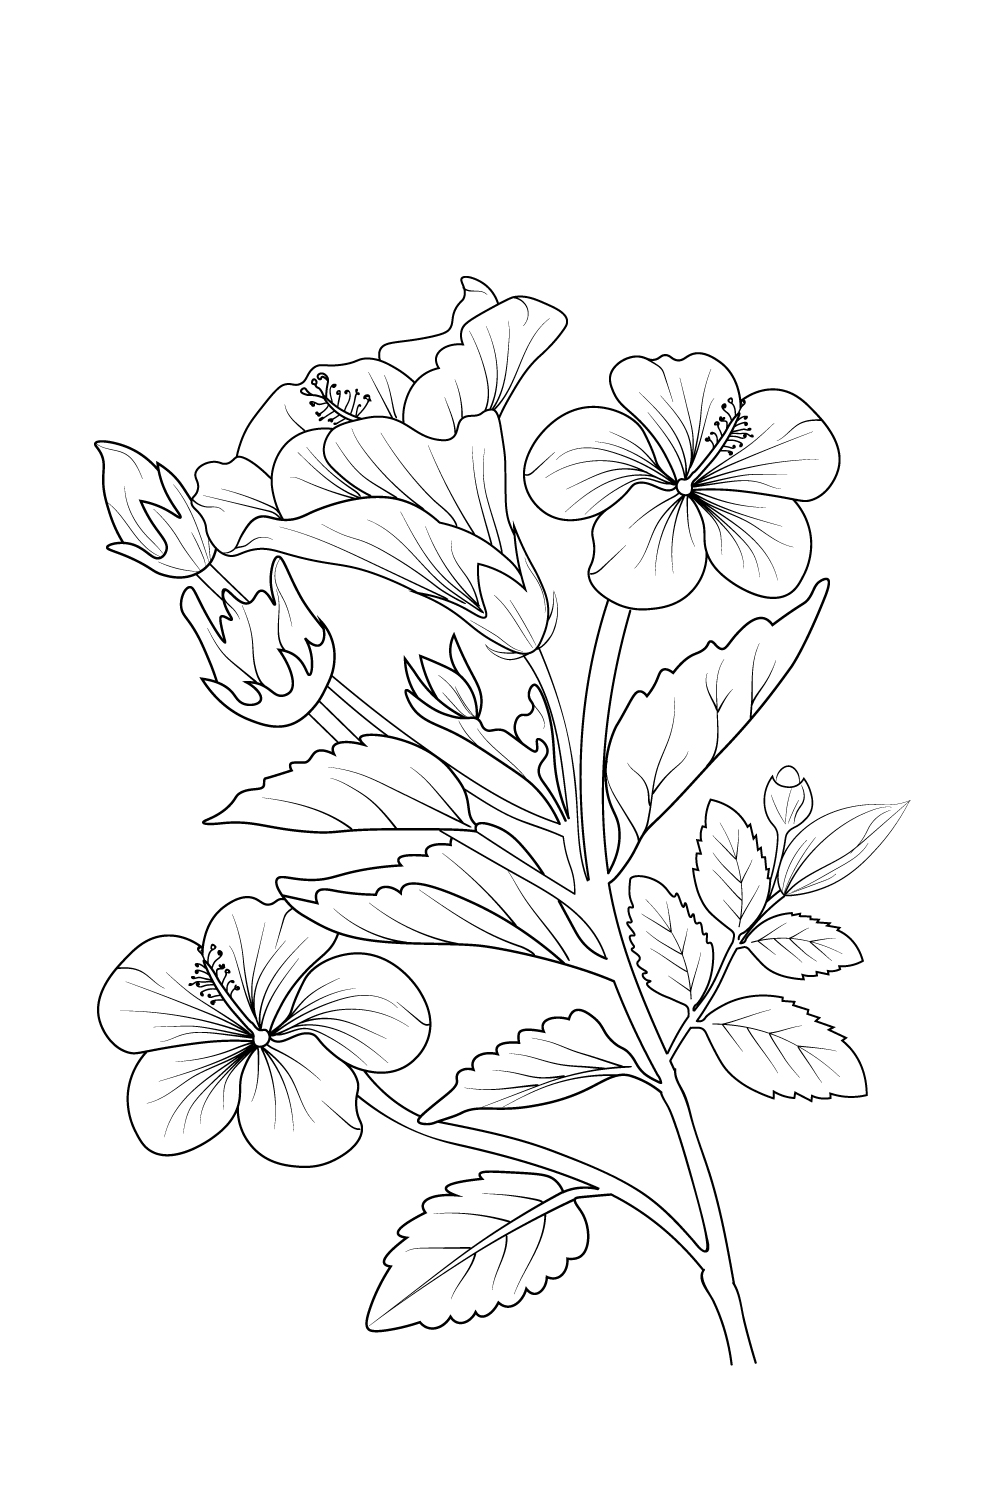 easy hibiscus flower sketch Botanical hibiscus flower drawing, hibiscus flower ink art pinterest preview image.